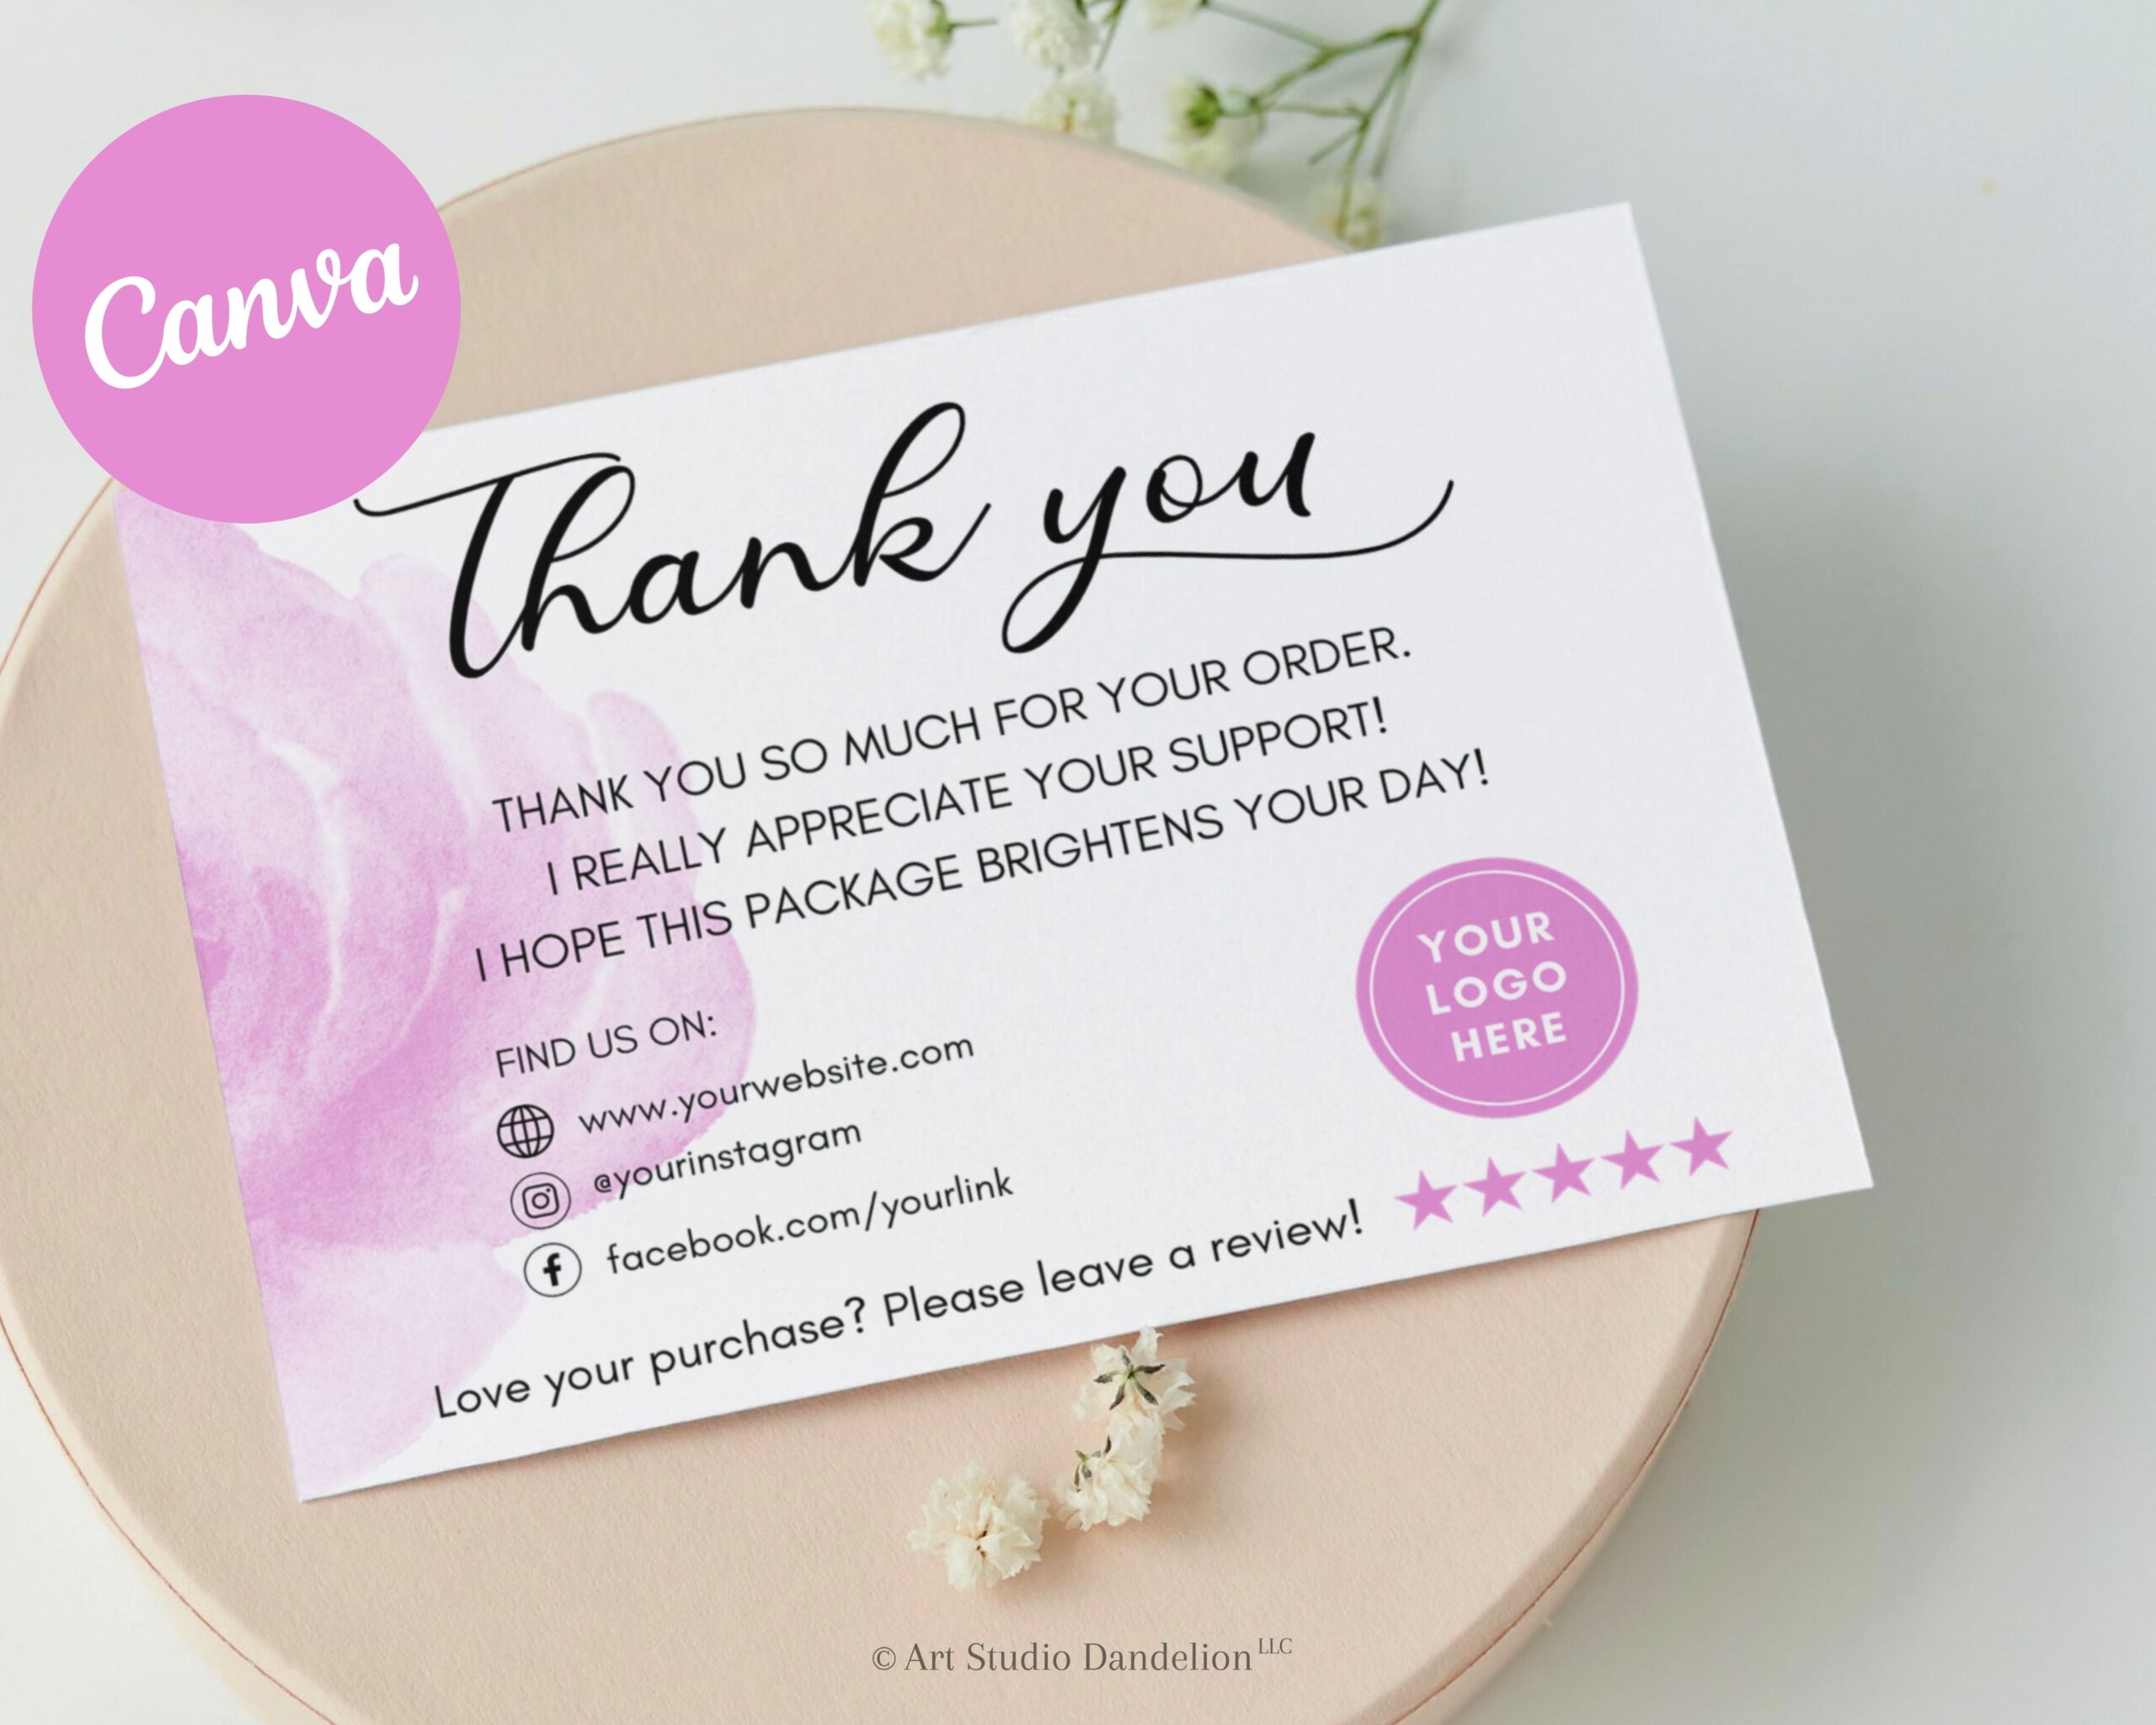 Watercolor Thank You Card - Etsy Small Business Thank You Card. Fully Editable, Instant Download, Edit & Print - Print-Ready, Instant Access